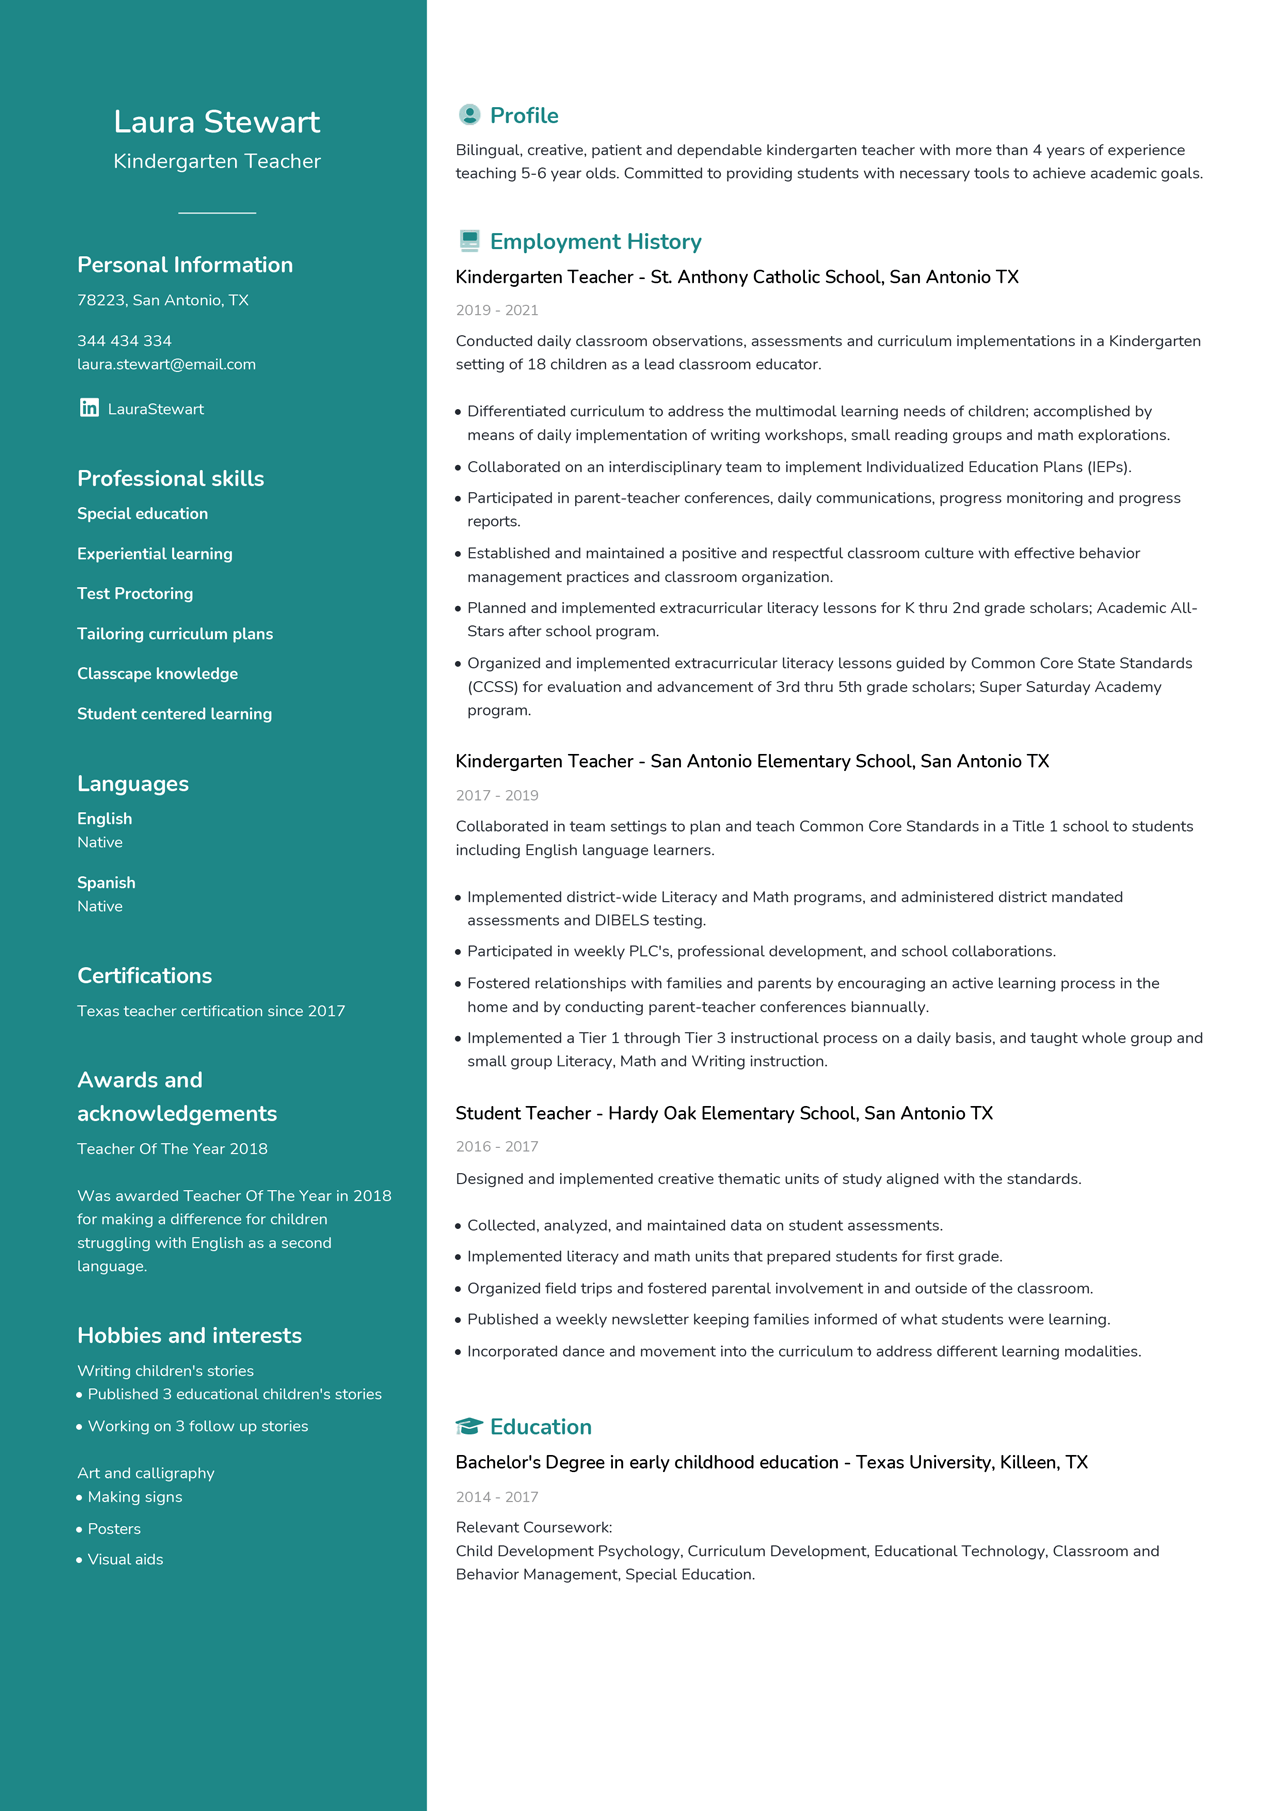 Image of a kindergarten school teacher resume with more than 4 years of experience